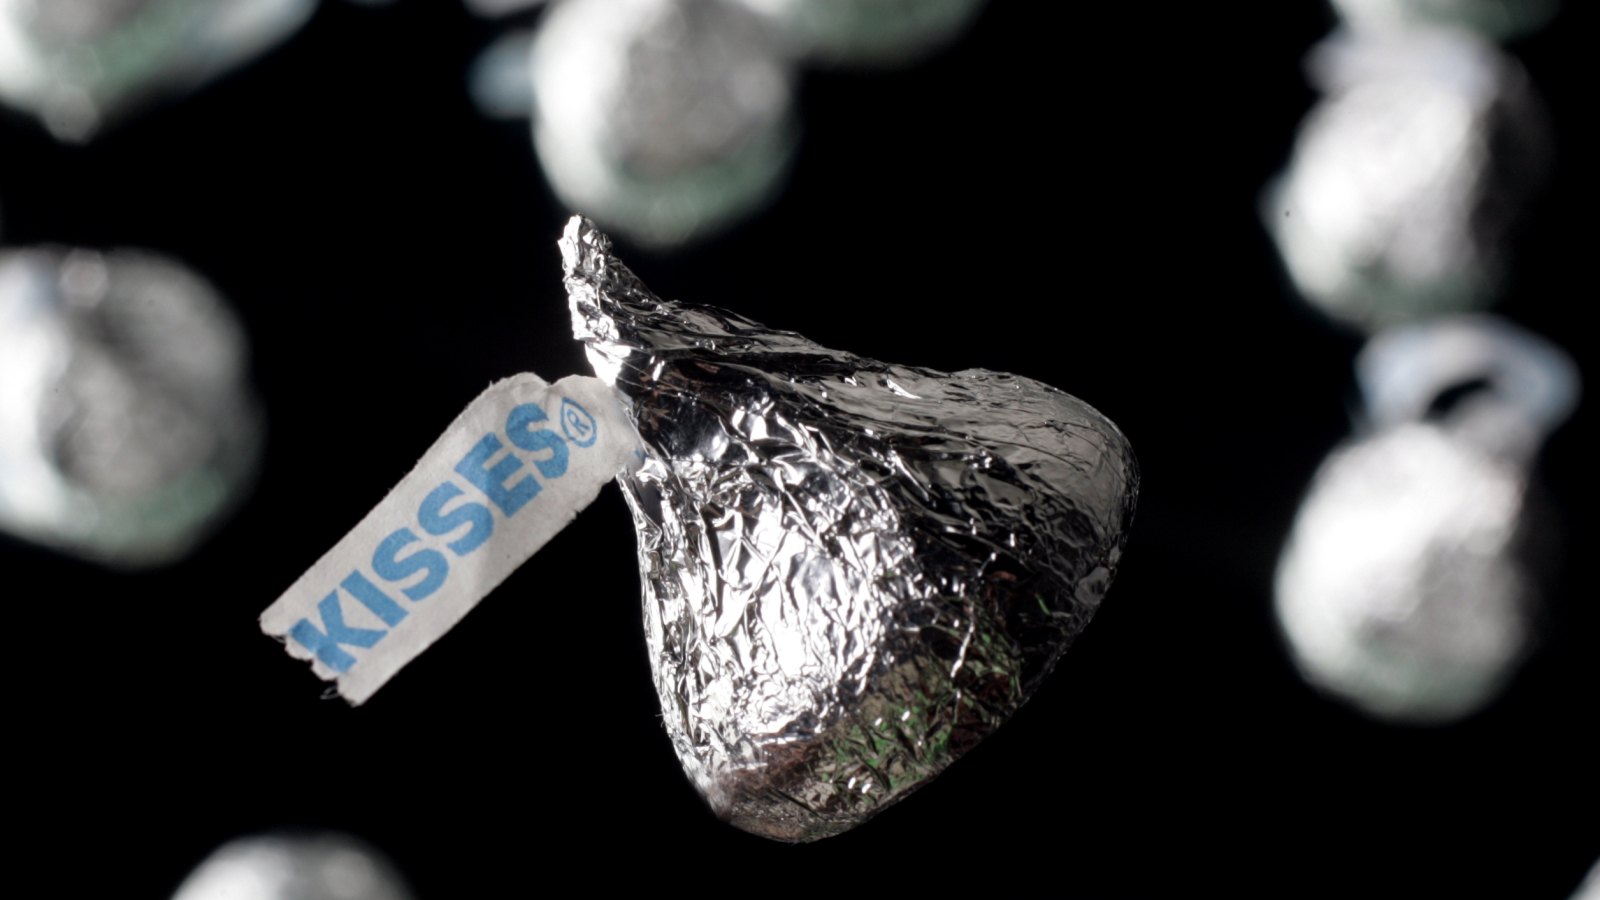 Uh-Oh, Hershey's Broken Kiss Epidemic Could Extend Beyond the Holidays